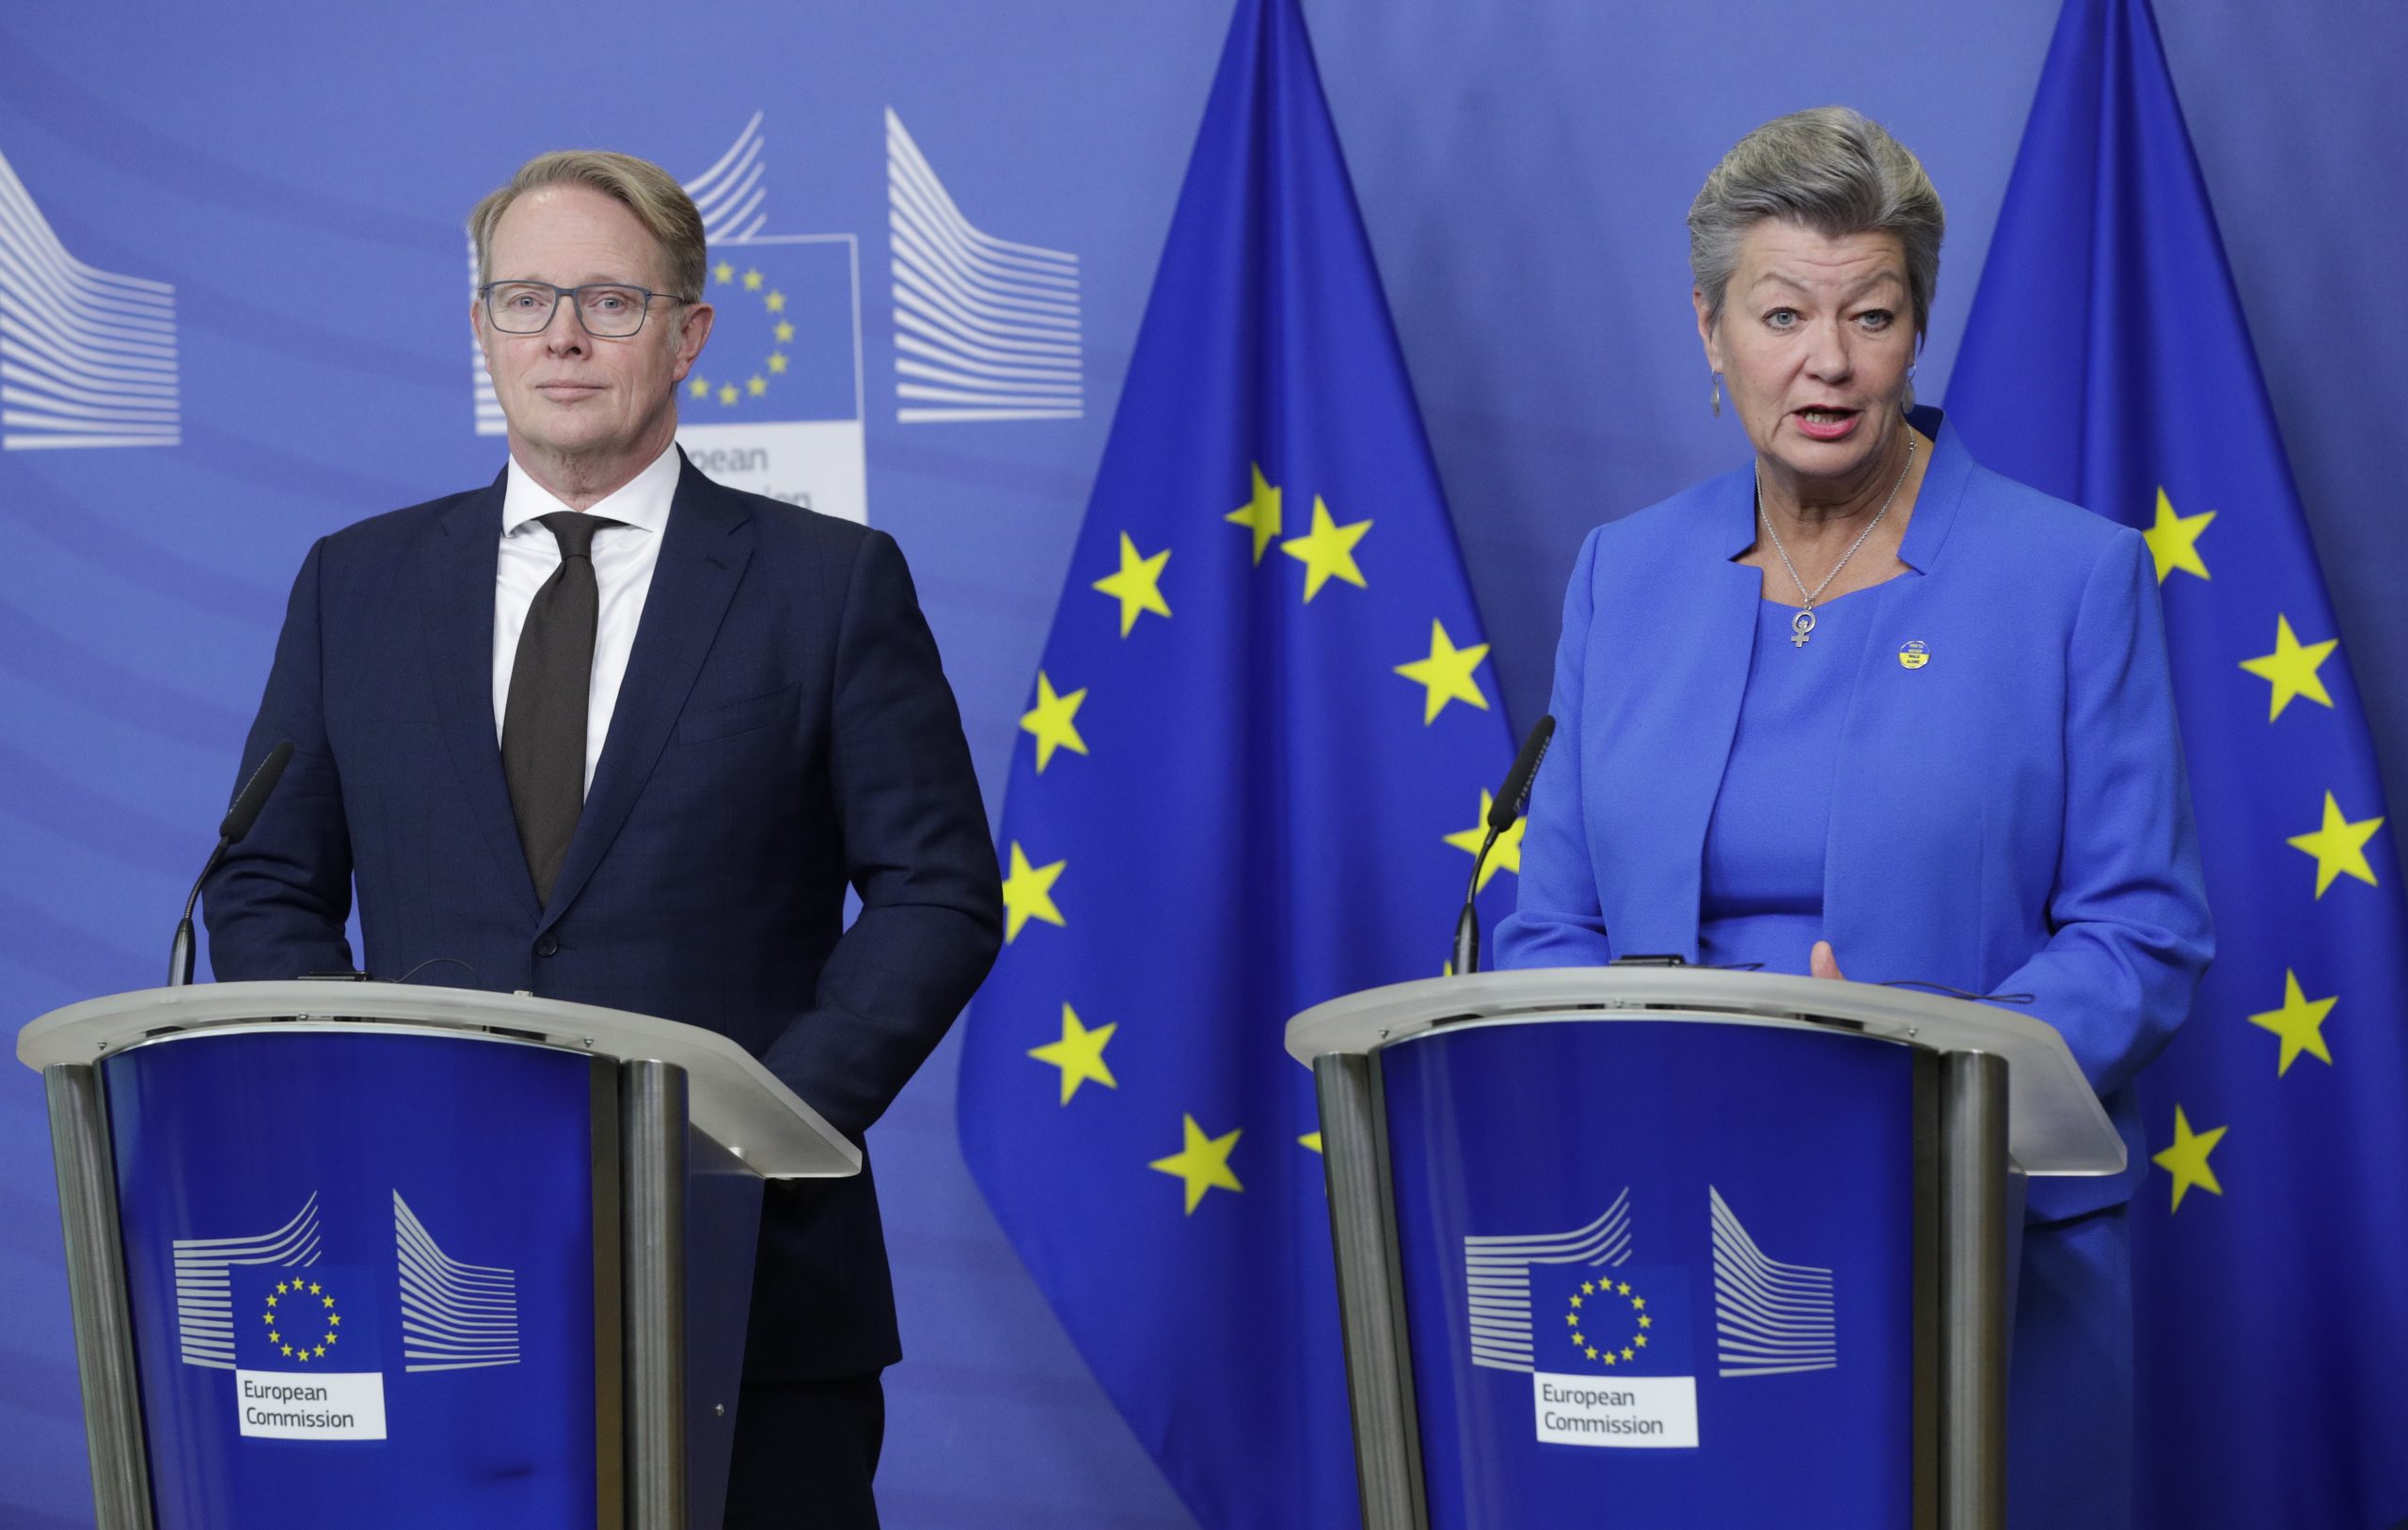 epa10415368 Executive Director of the European Border and Coast Guard (FRONTEX) Hans Leijtens (L) and European Commissioner for Home Affairs Ylva Johansson (R) address a press conference in Brussels, Belgium, 19 January 2023. Leijtens was appointed in December 2022 to run for a five-year term.  EPA/OLIVIER HOSLET